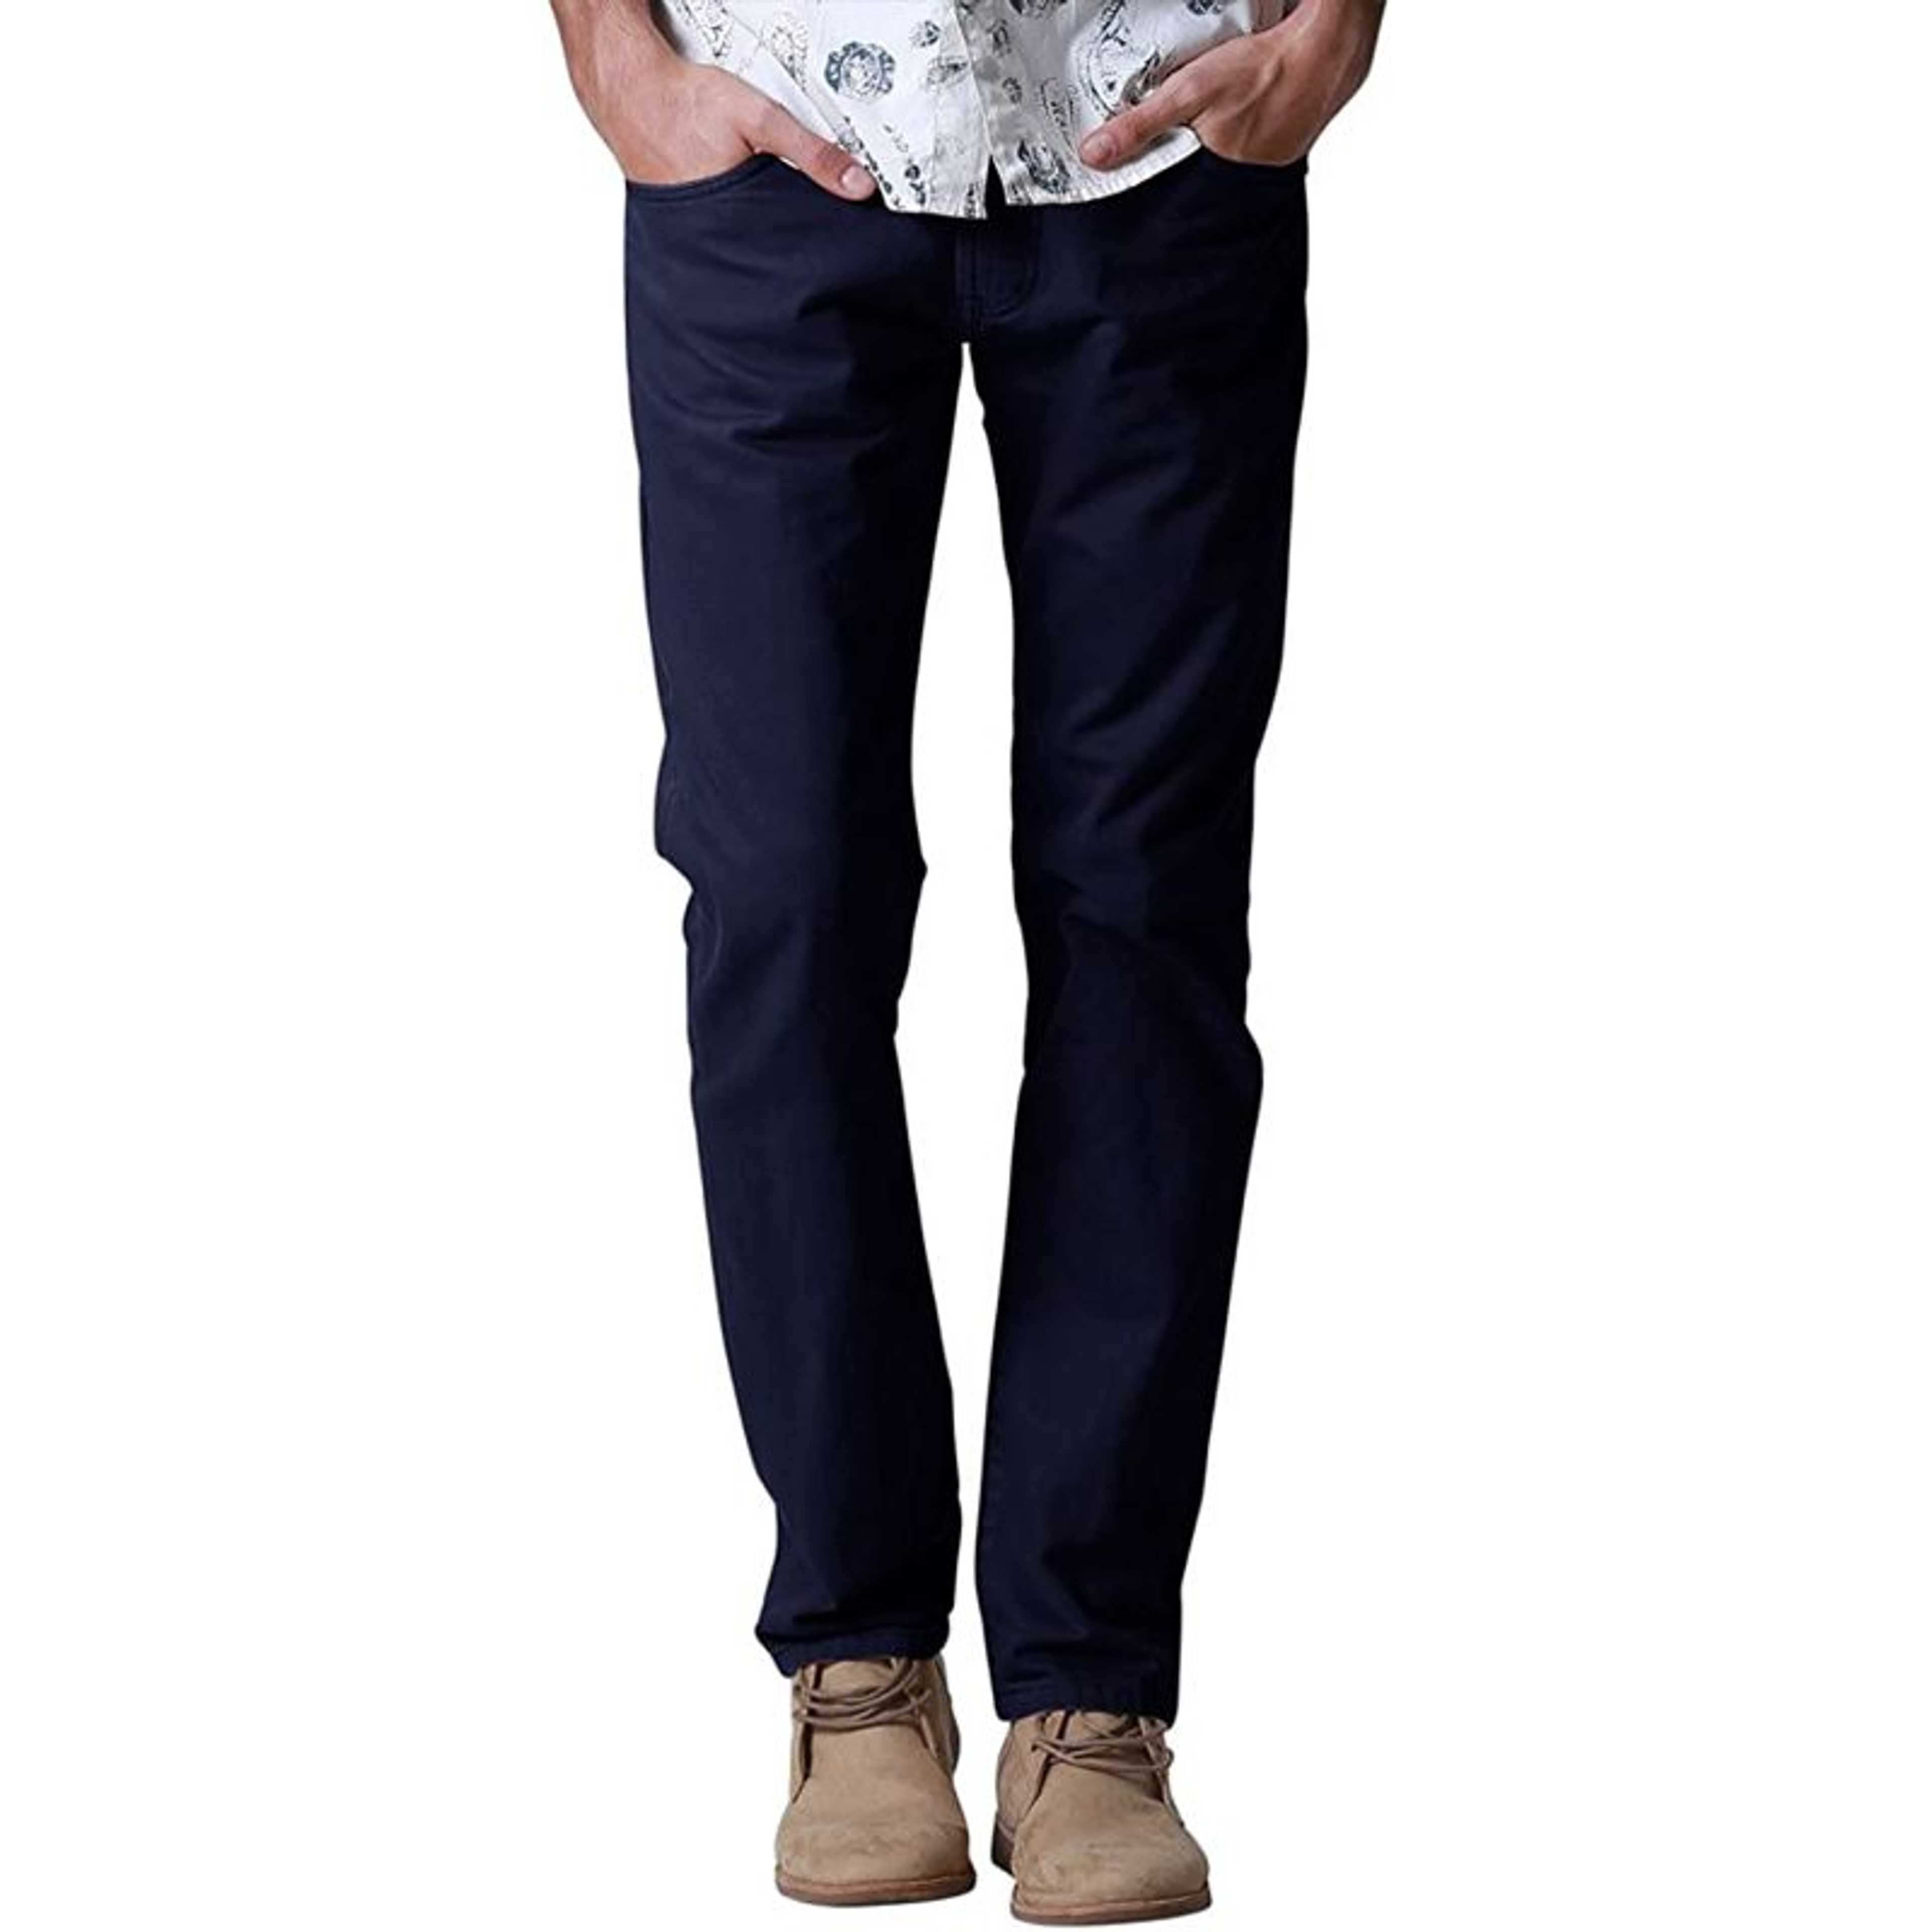 Rubahas Men’s Straight Leg Casual Pants in Navy Color